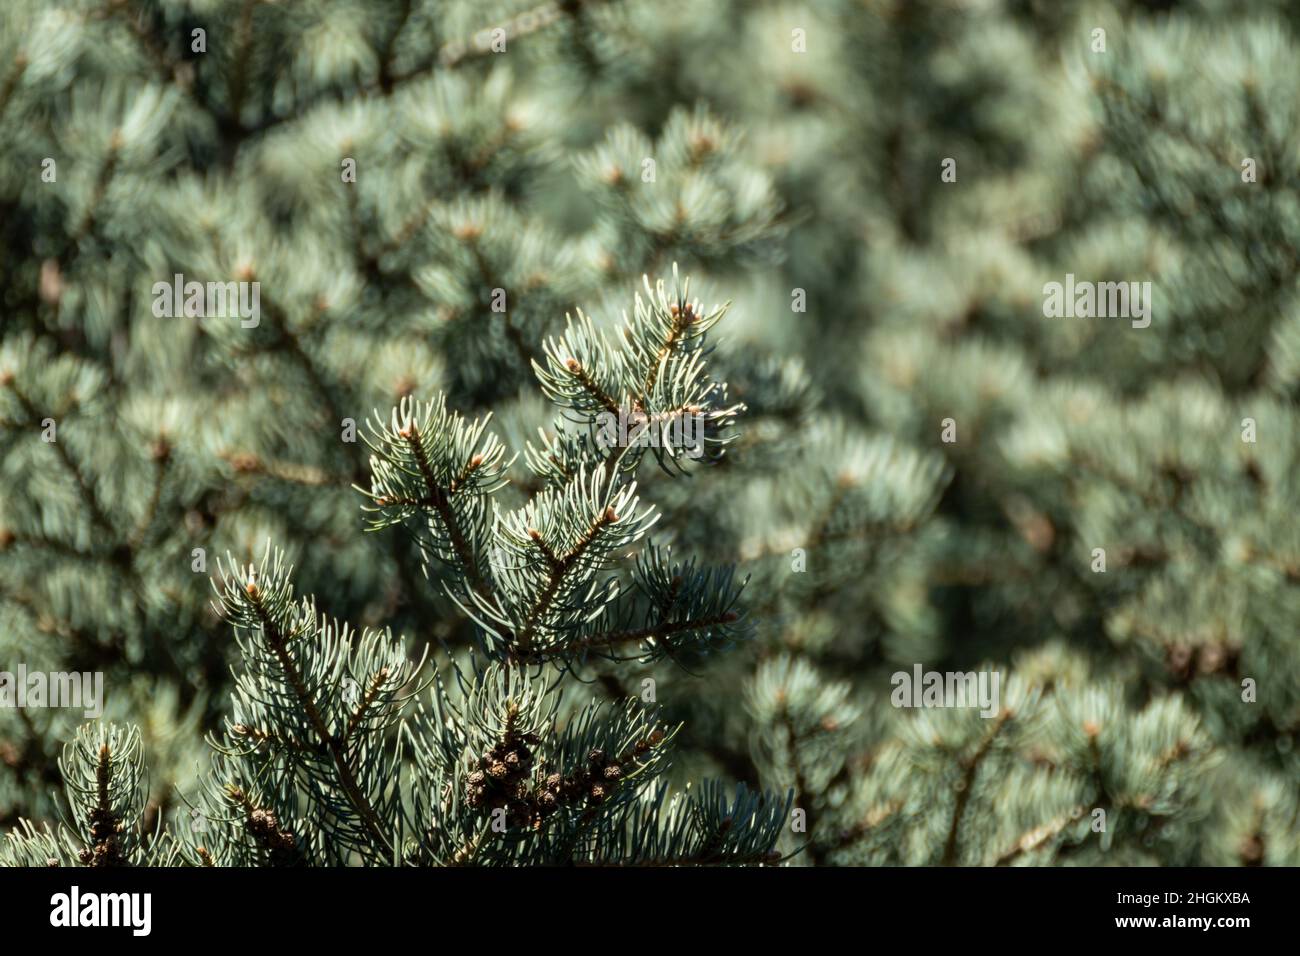 White Fir (Abies concolor) coniferous evergreen pine tree needles close-up on sunny blurry background. Natural spring branches close view Stock Photo